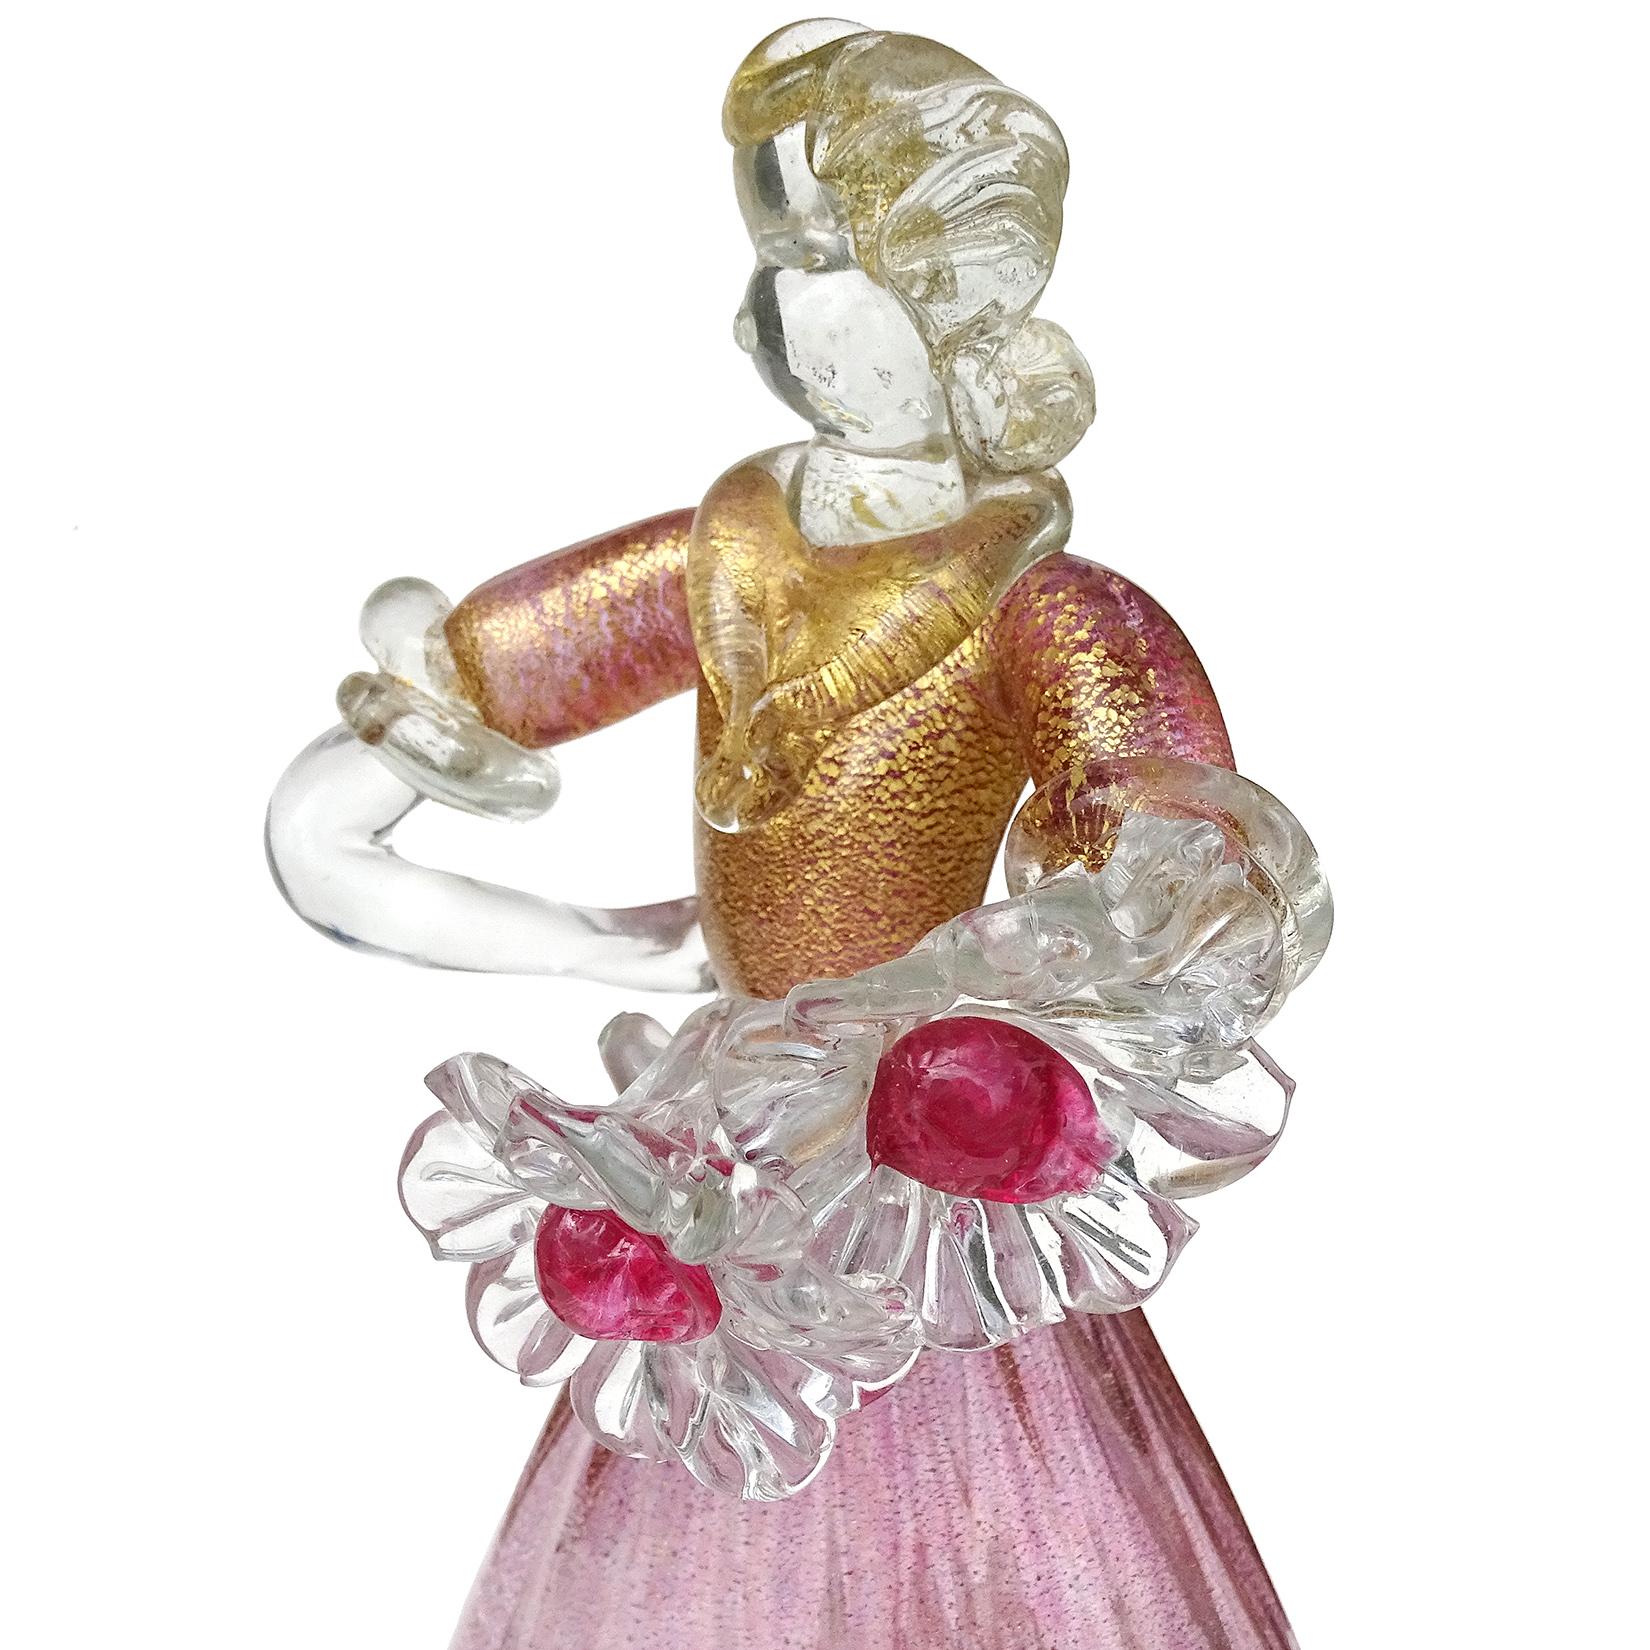 Beautiful vintage Murano hand blown Sommerso pink with gold flecks Italian art glass man and woman farmer / gardener sculptures. Attributed to designer, and Master glass artist Alfredo Barbini. The color is pink, but they have tiny little blue color